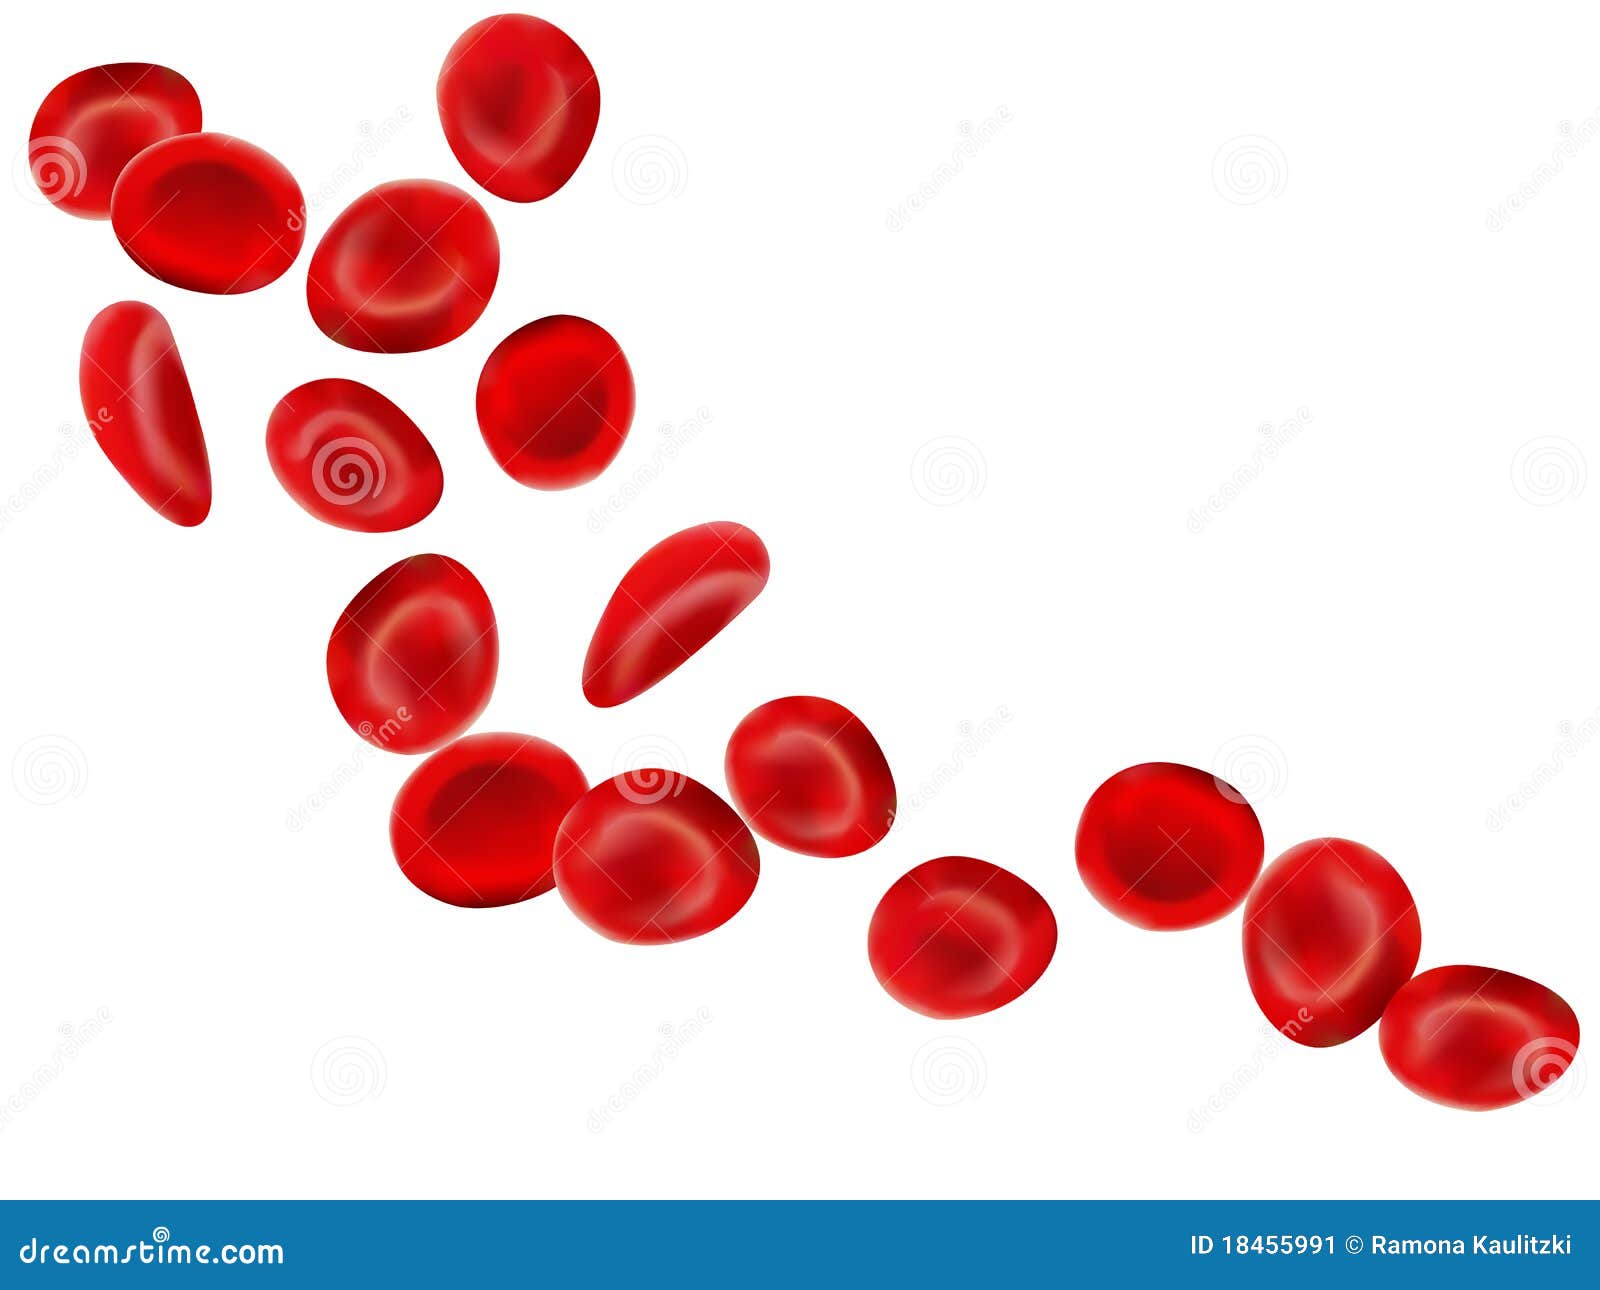 clipart red blood cell - photo #3